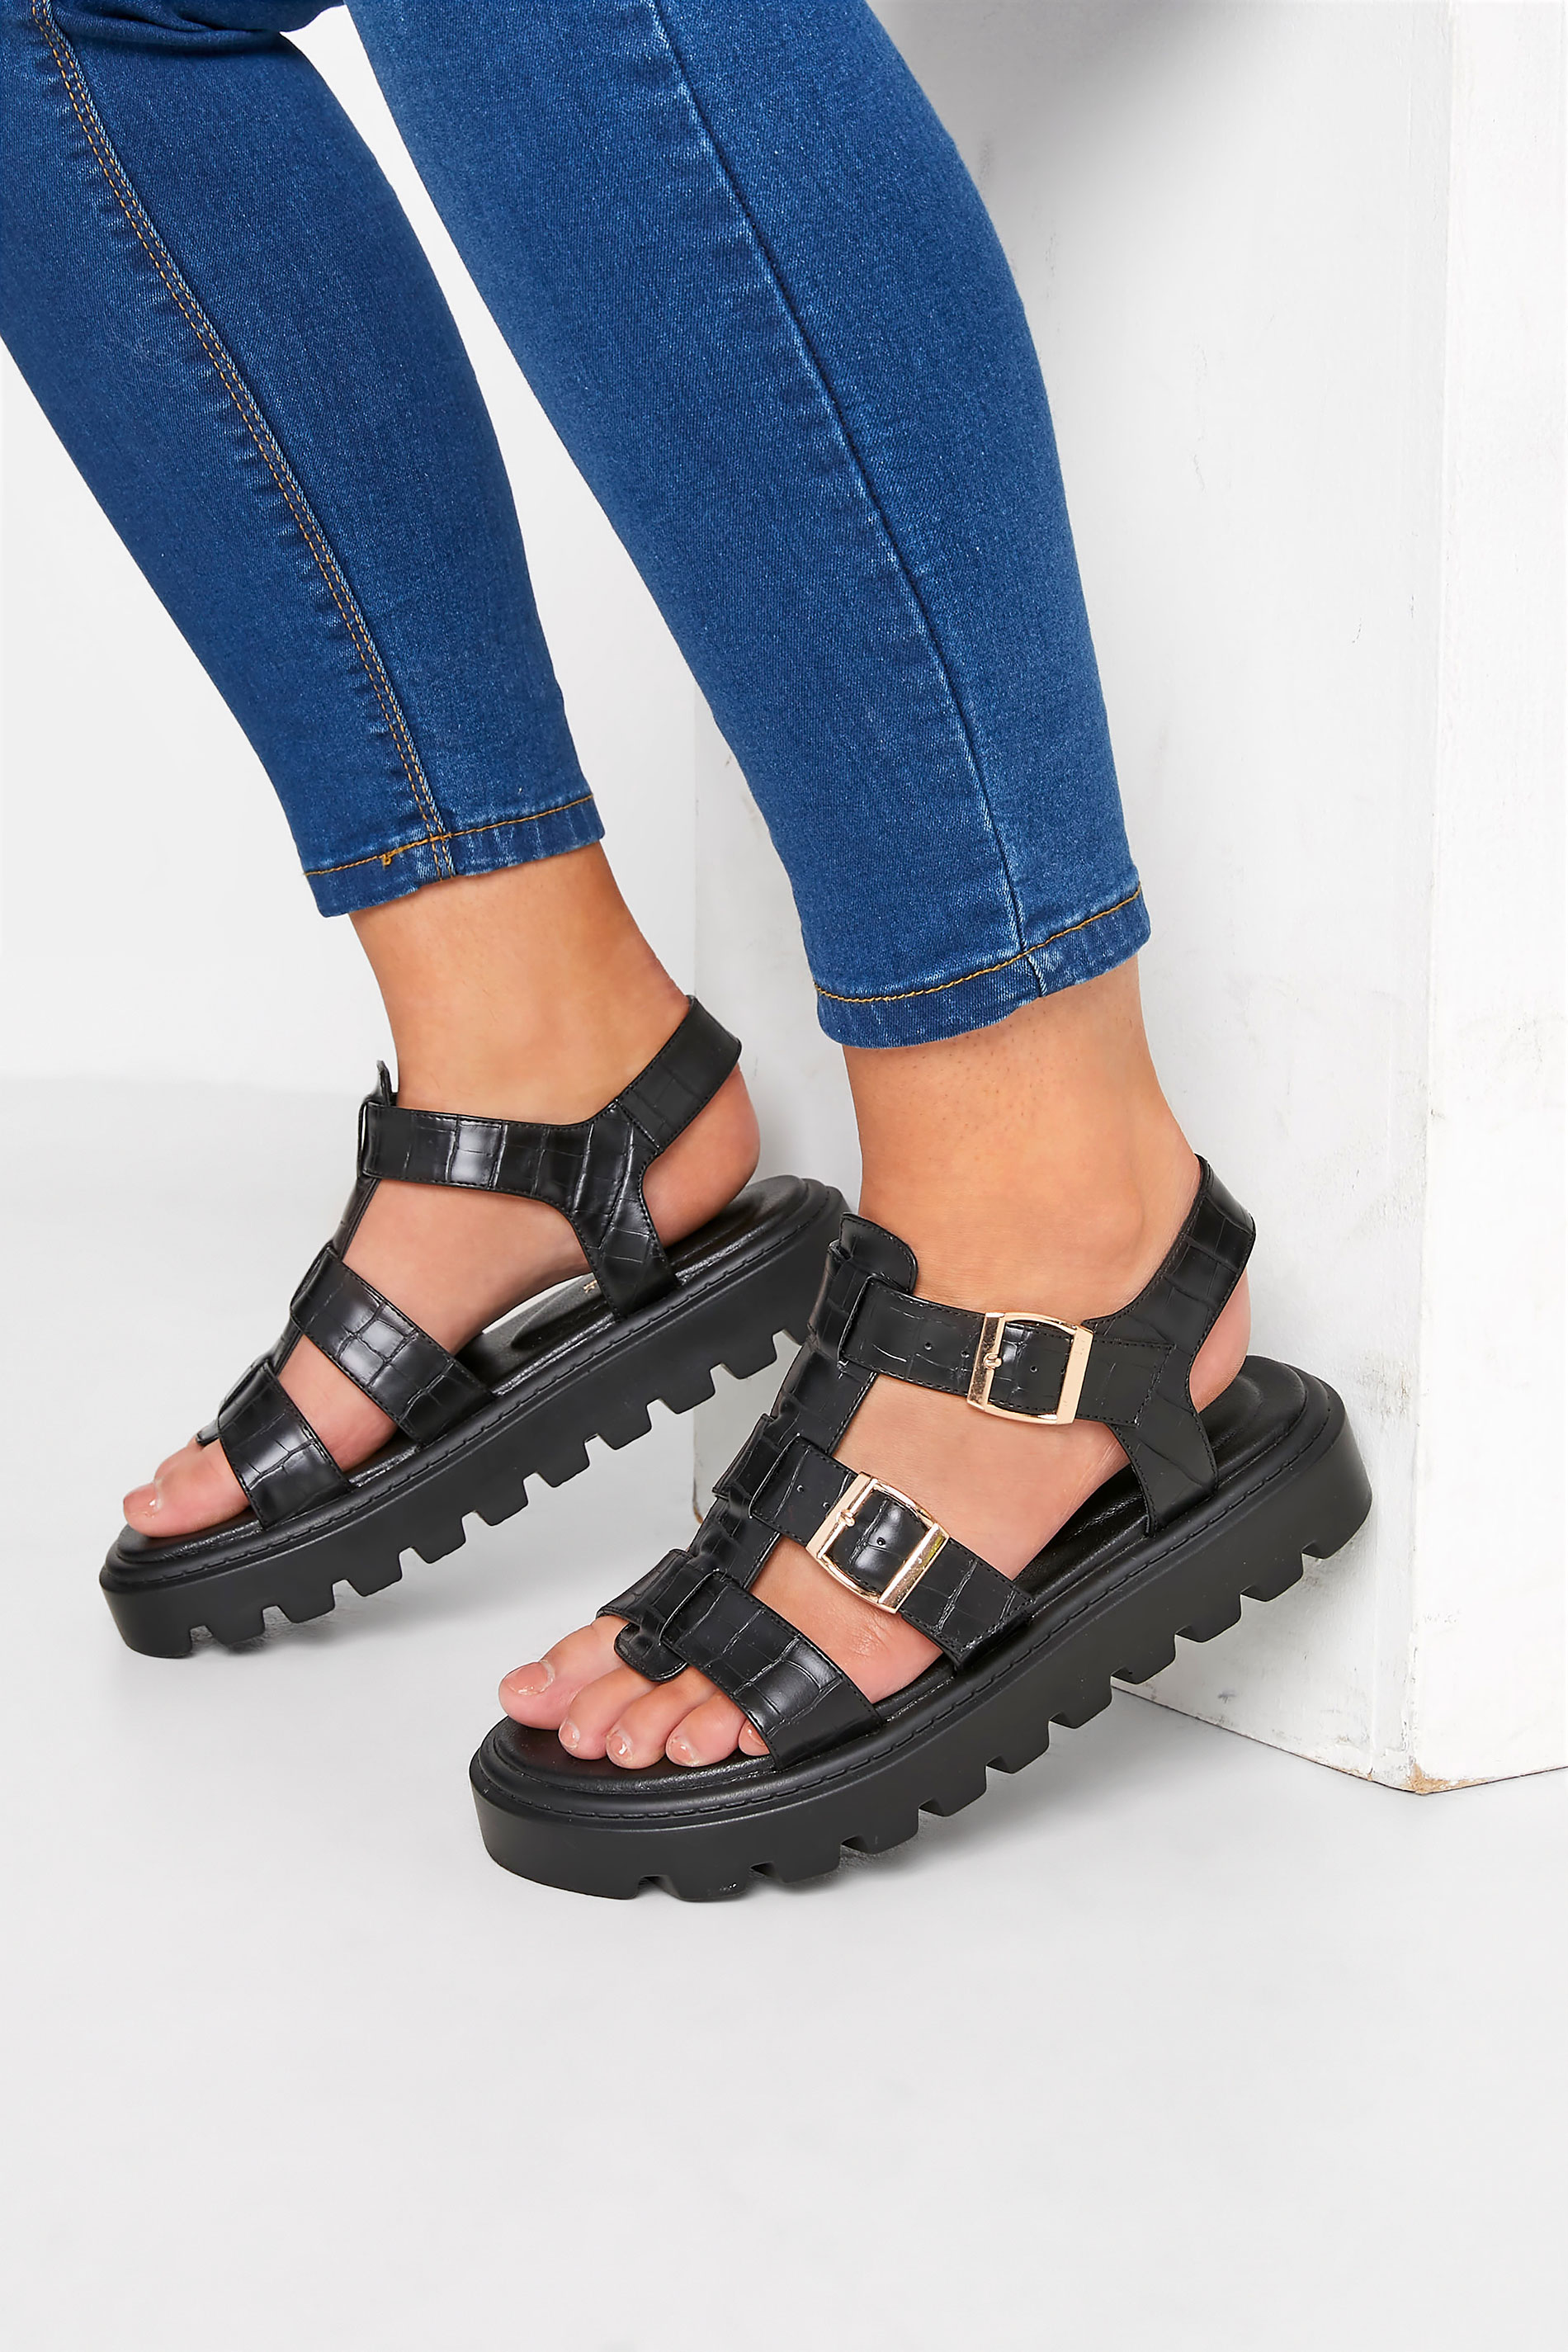 LIMITED COLLECTION Black Croc Gladiator Sandals In Extra Wide EEE Fit 1